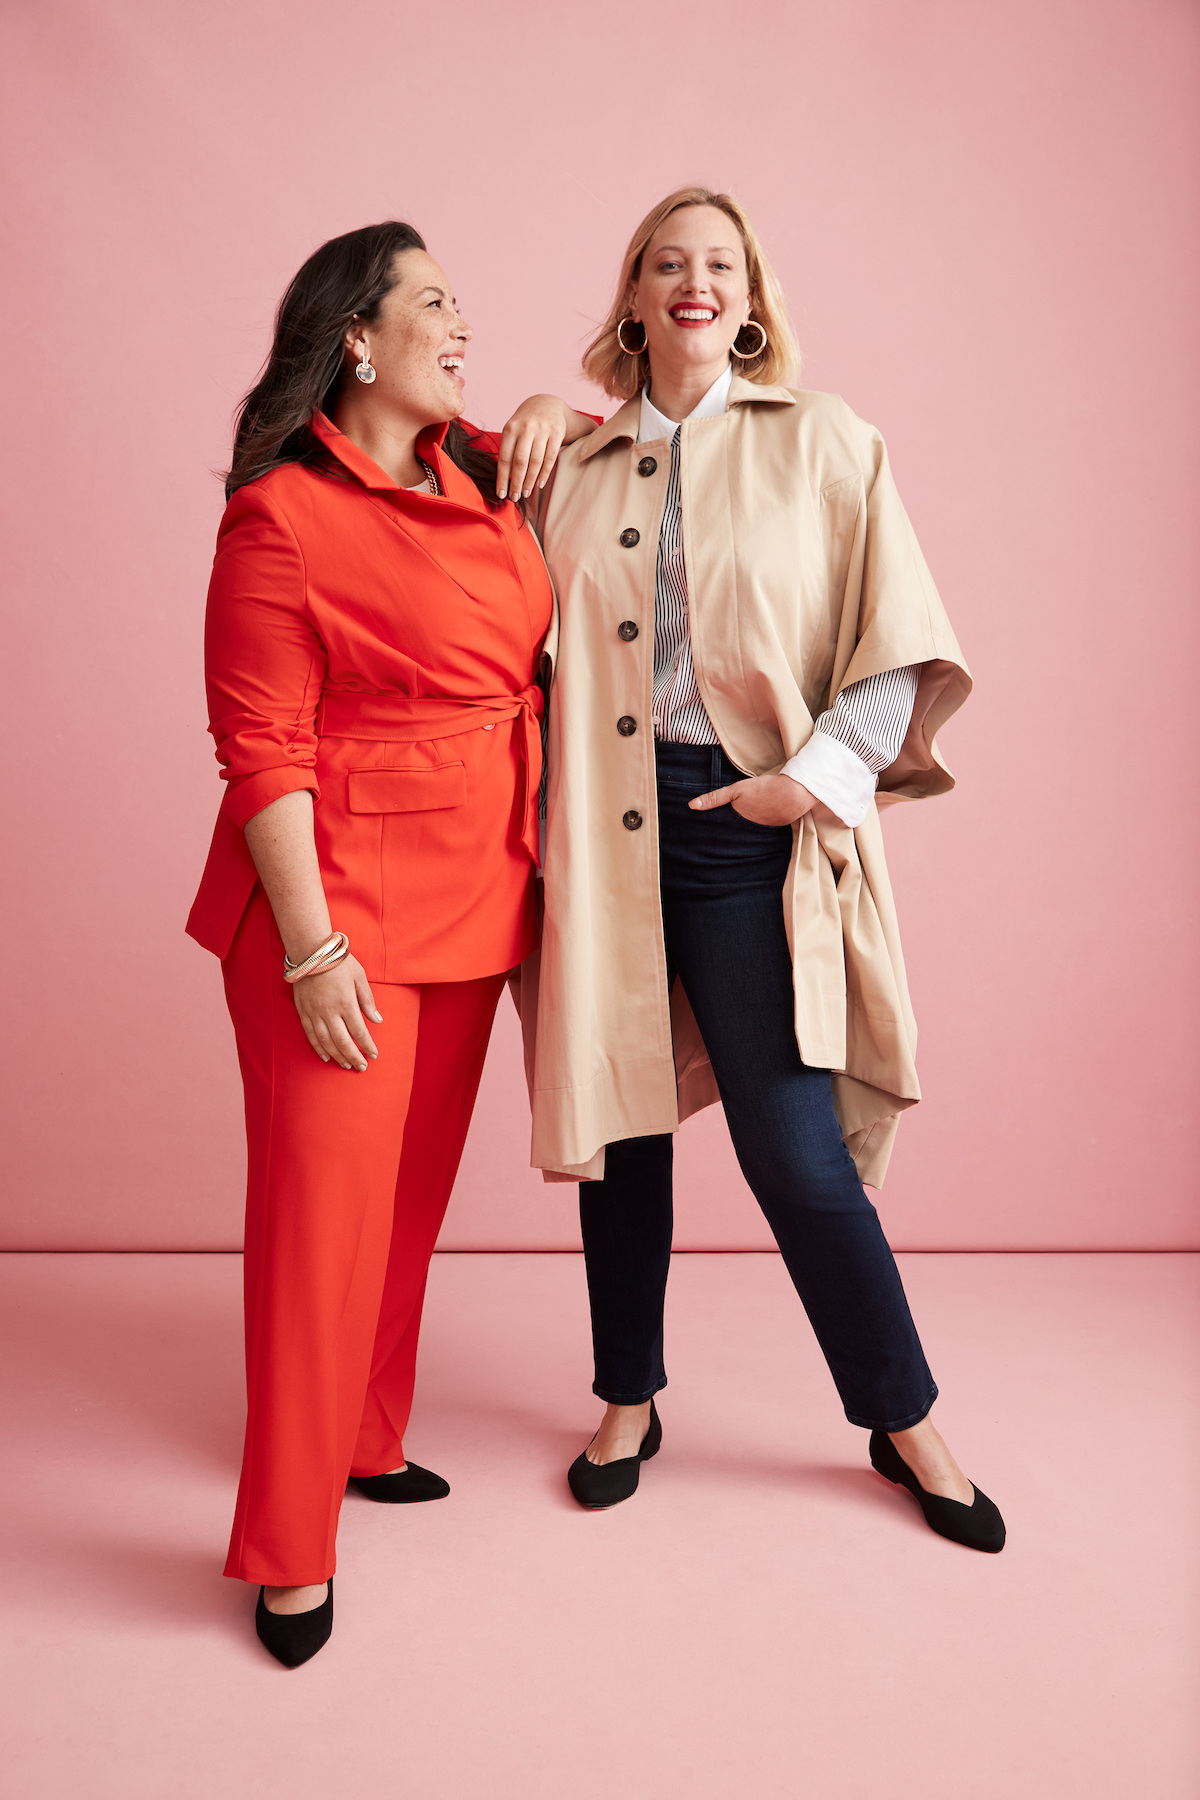 <p>If you've ever walked through a U.S. shopping mall, we're guessing this brand rings a bell. <a rel="nofollow noopener noreferrer external" href="https://www.lanebryant.com/">Lane Bryant</a> has been around since 1904, offering sizes 10-40.</p><p>"They've been at this the longest and it shows—broad range of product, impeccable fits, and great design, all of which validates their keen understanding of the plus-size woman," says Kosich.</p><p>In fact, Lane Bryant tests all of its pants and jeans "on real plus size women of all incredible shapes and sizes," a spokesperson for the company shared with <em>Best Life</em>.</p><p>Kosich adds that Lane Bryant now has many brands within the brand, like <a rel="nofollow noopener noreferrer external" href="https://www.lanebryant.com/cacique-intimates">Cacique</a> for intimates and <a rel="nofollow noopener noreferrer external" href="https://www.lanebryant.com/livi-active/about-livi">LIVI</a> for activewear. And she advises shoppers to watch out for collaborations with designers and influencers, such as <strong>Prabal Gurung</strong> in 2017 and Girl with Curves in 2018.</p><p>The prices are also right, with jeans averaging around $80 (many were on sale for as low as $30 at the time of writing) and cozy sweaters starting at $60.</p>